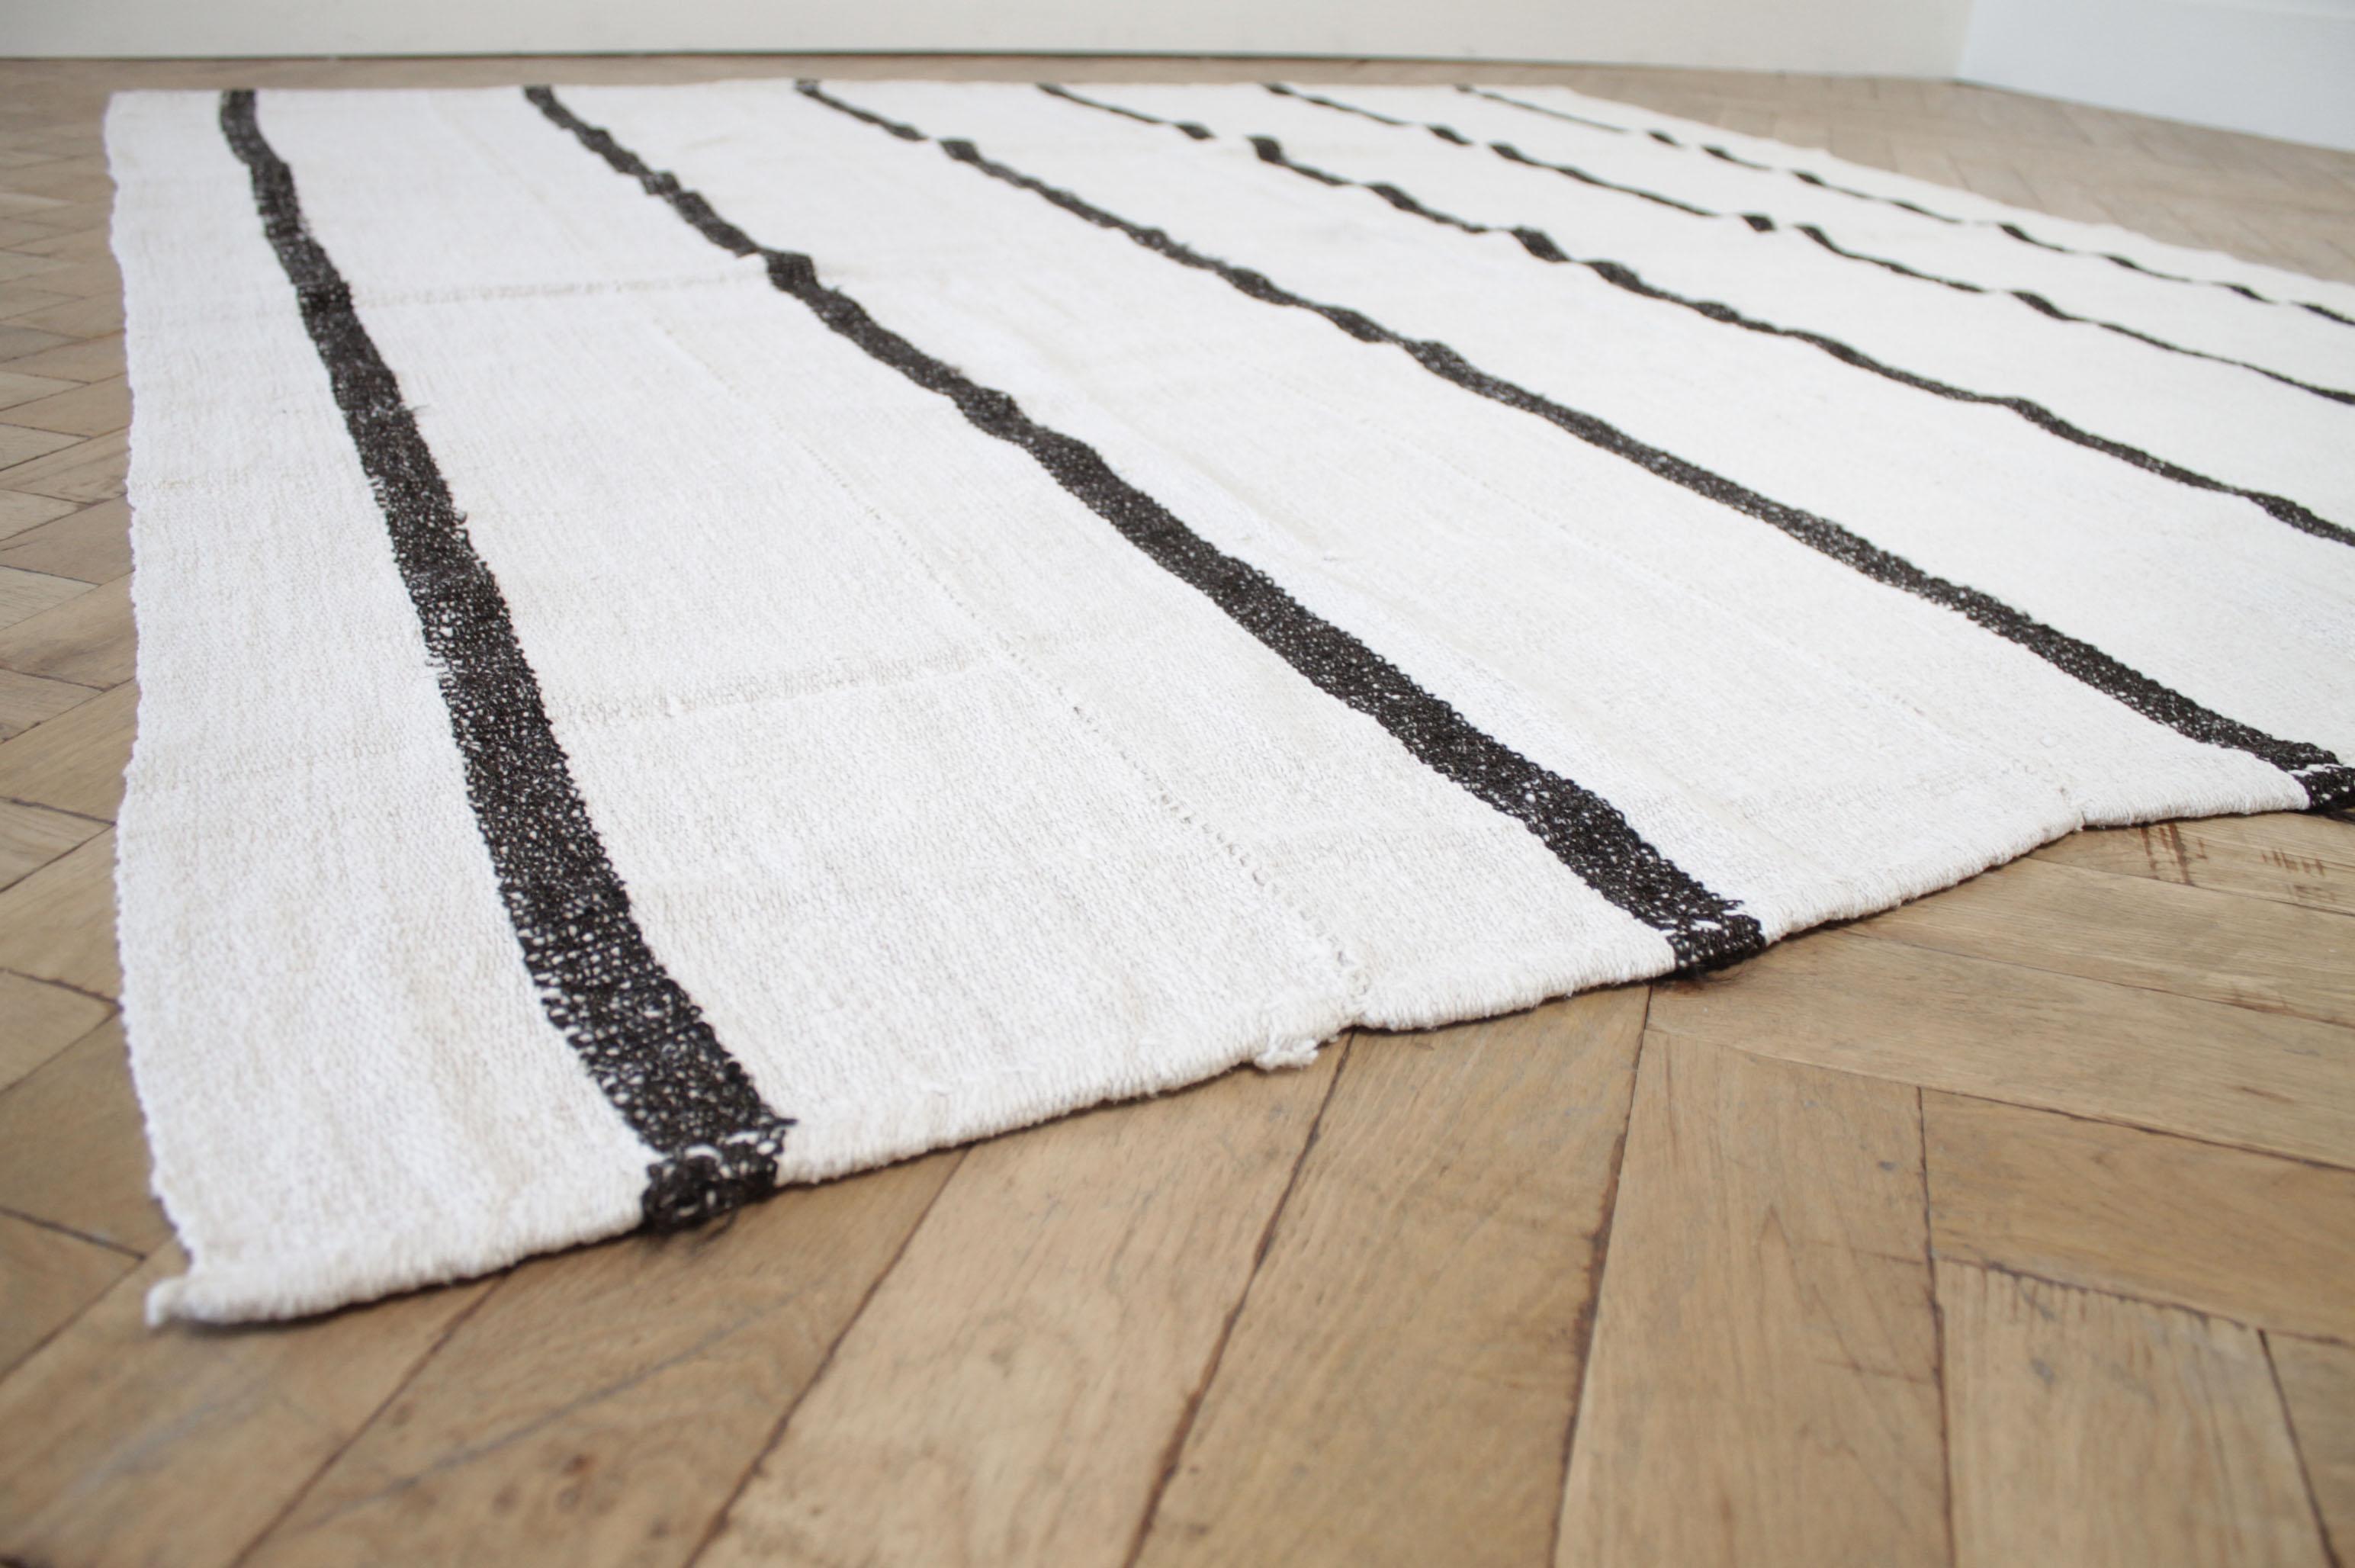 Asian Vintage Turkish Wool and Hemp Rug in Creamy White with Brown Stripes